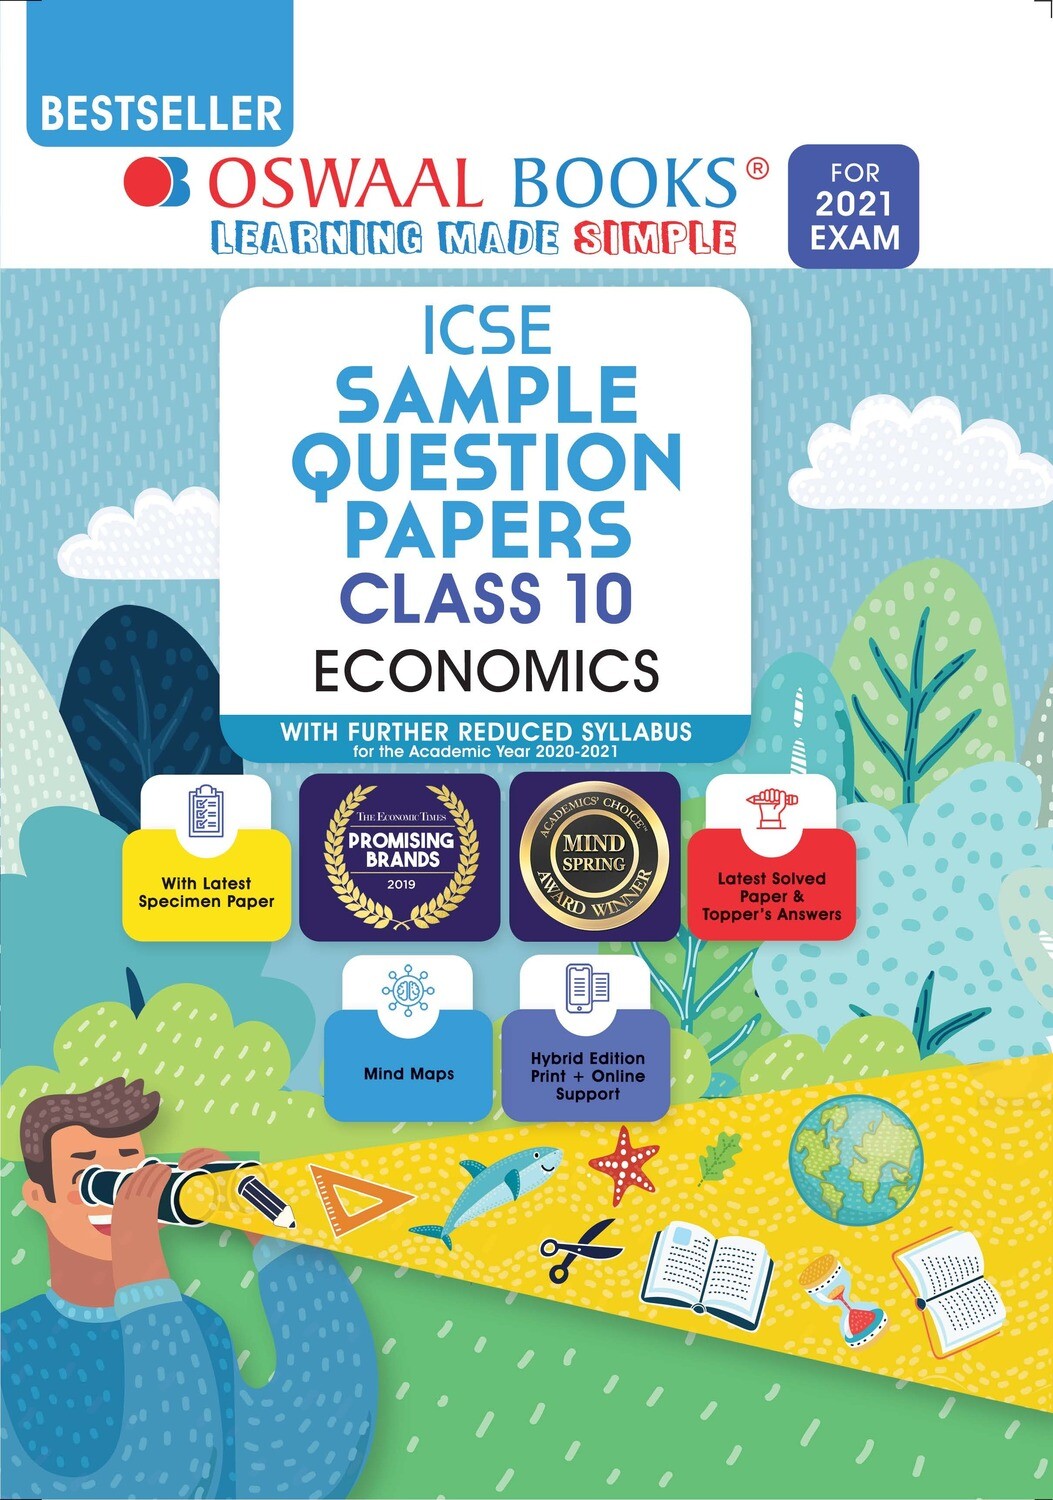 Buy e-book: Oswaal ICSE Sample Question Papers Class 10 Economics (Reduced Syllabus for 2021 Exam)